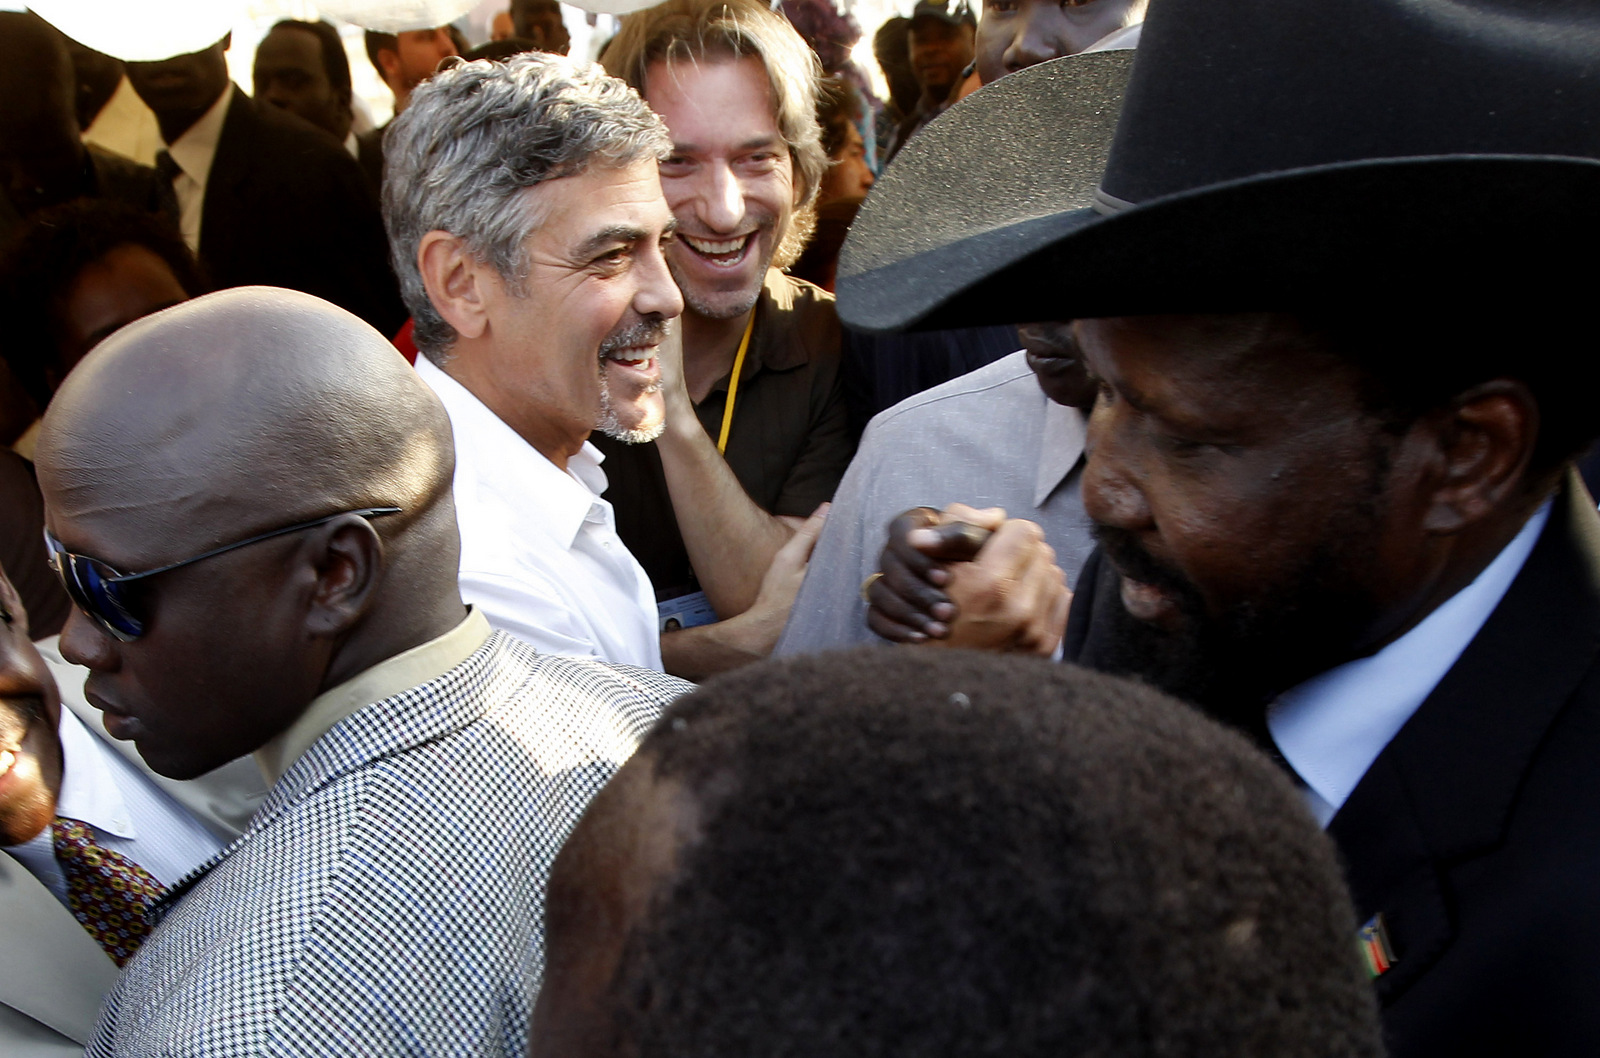 George Clooney smiles as Southern Sudan President Salva Kiir walks past after casting his vote in front of a cheering crowd of hundreds of Sudanese voters in Juba, Southern Sudan, Jan. 9, 2011. (AP/Jerome Delay)